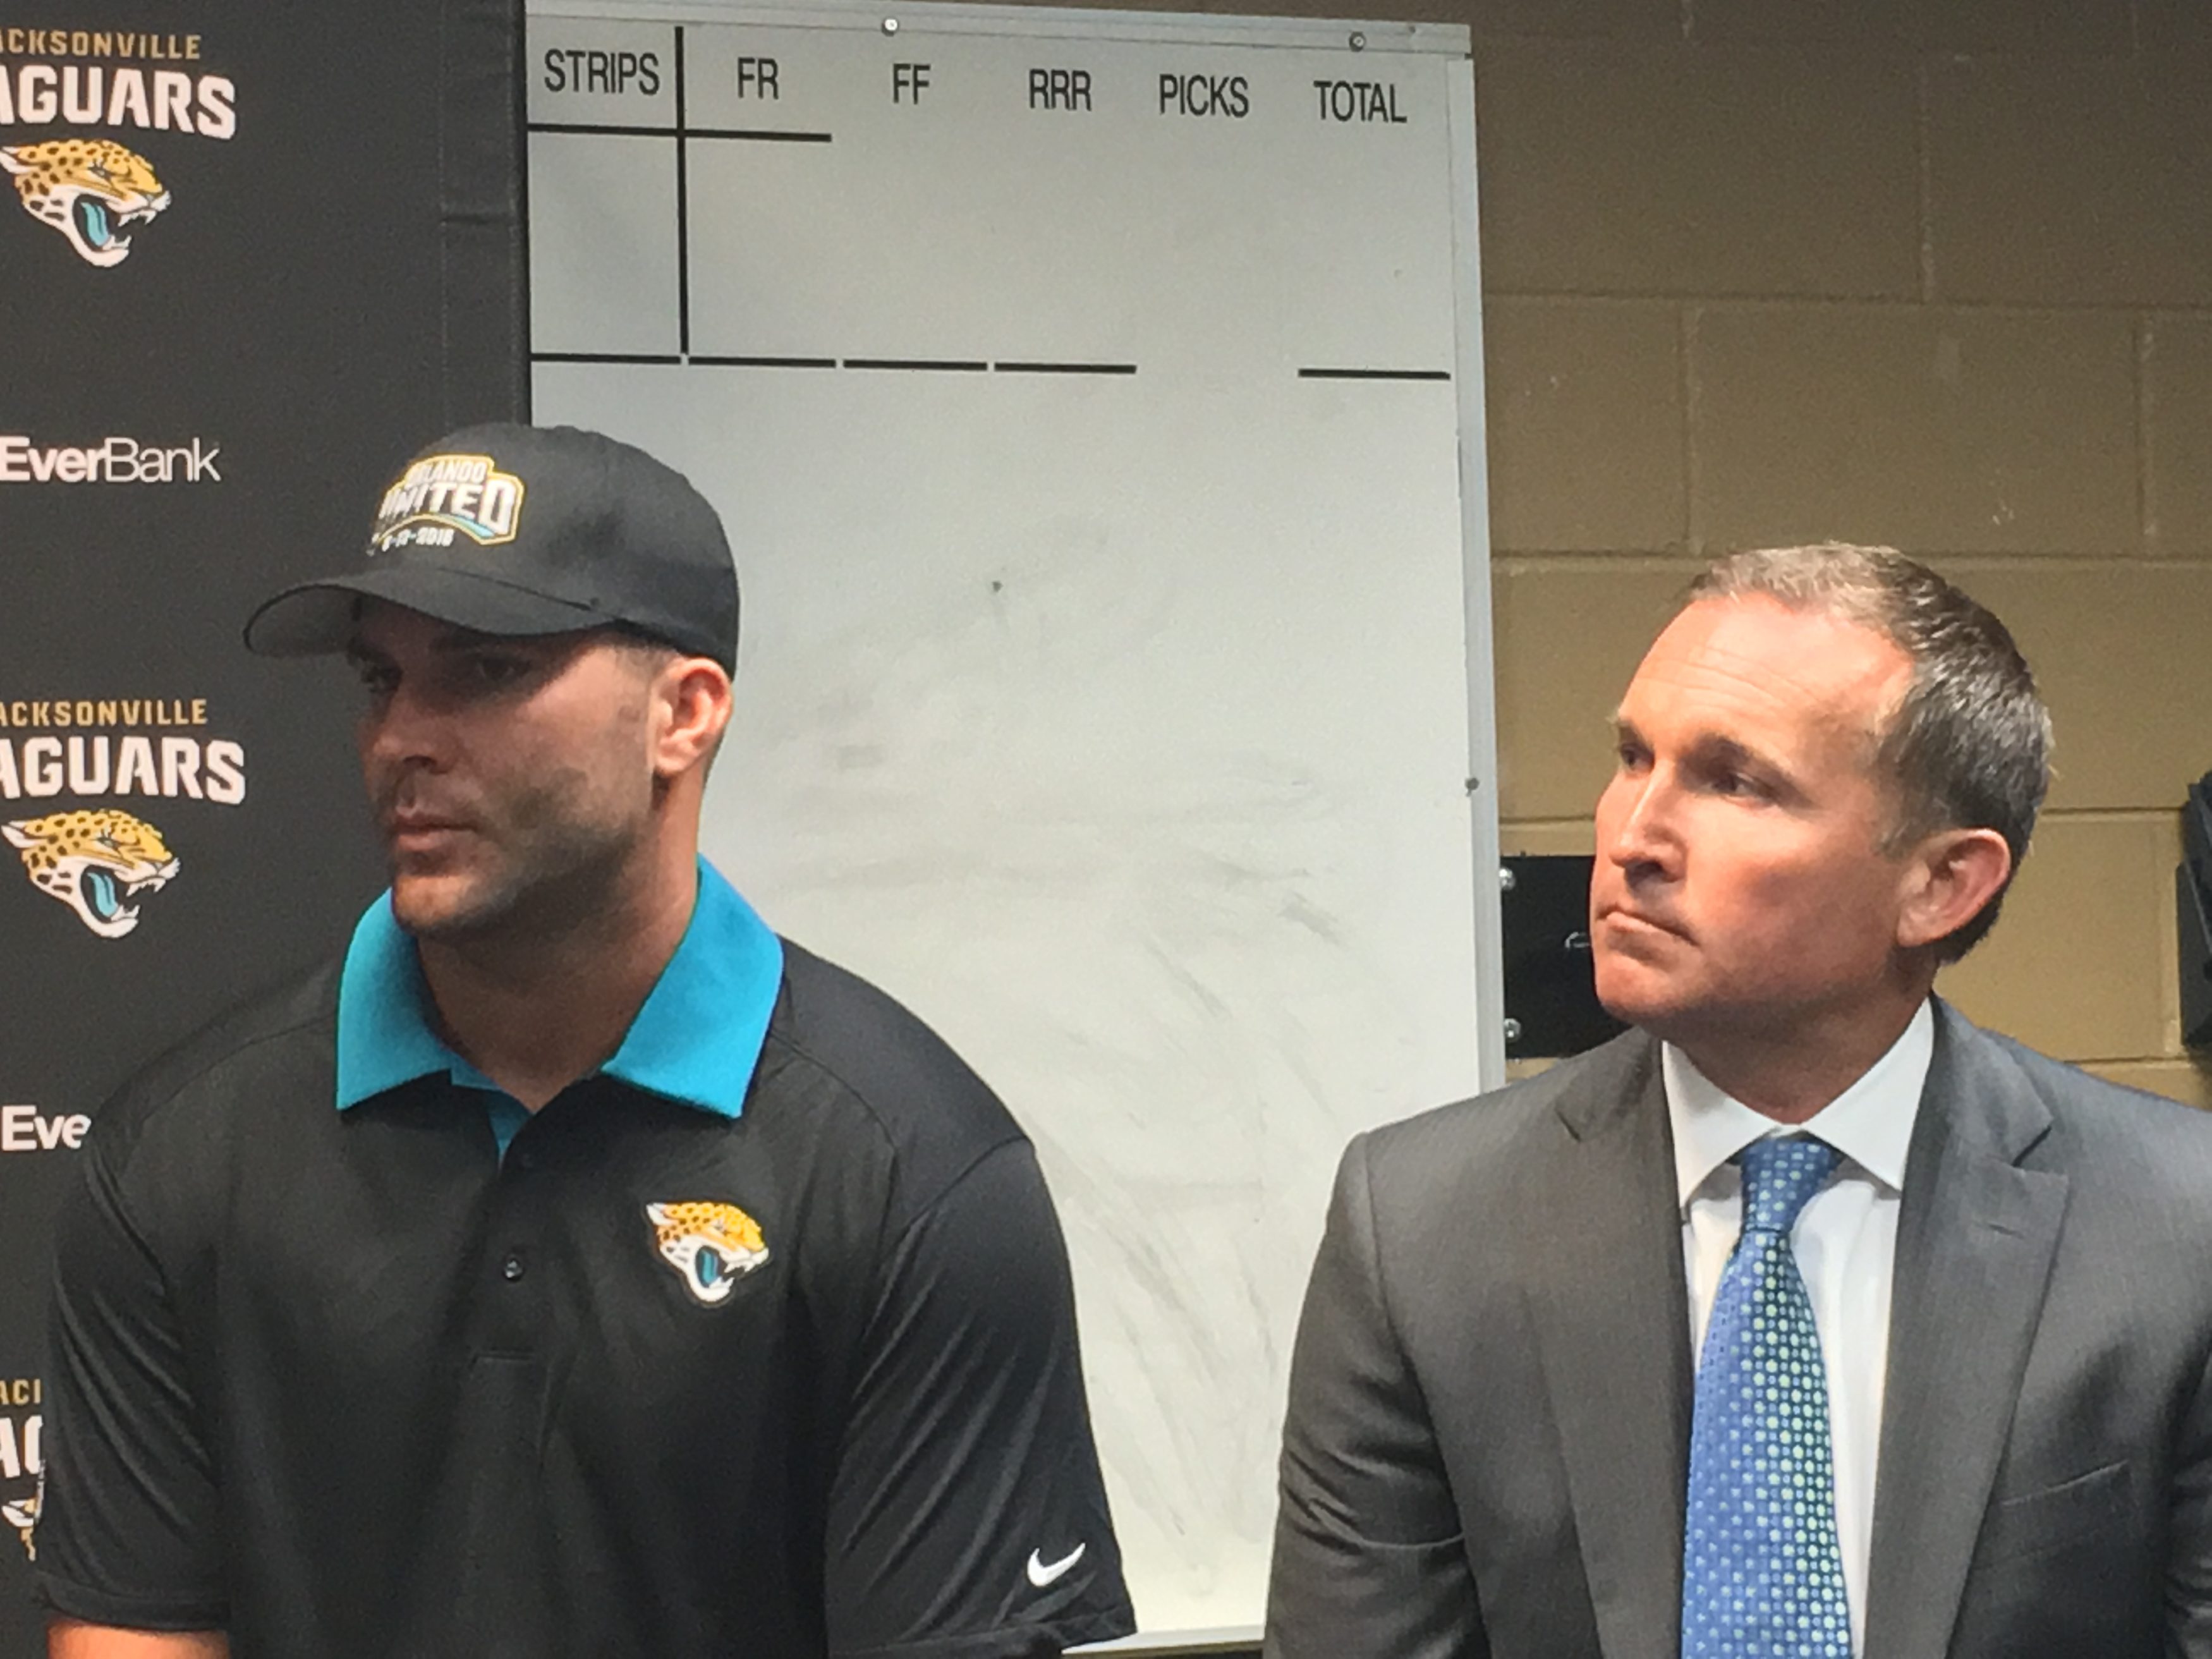 Blake Bortles and Lenny Curry